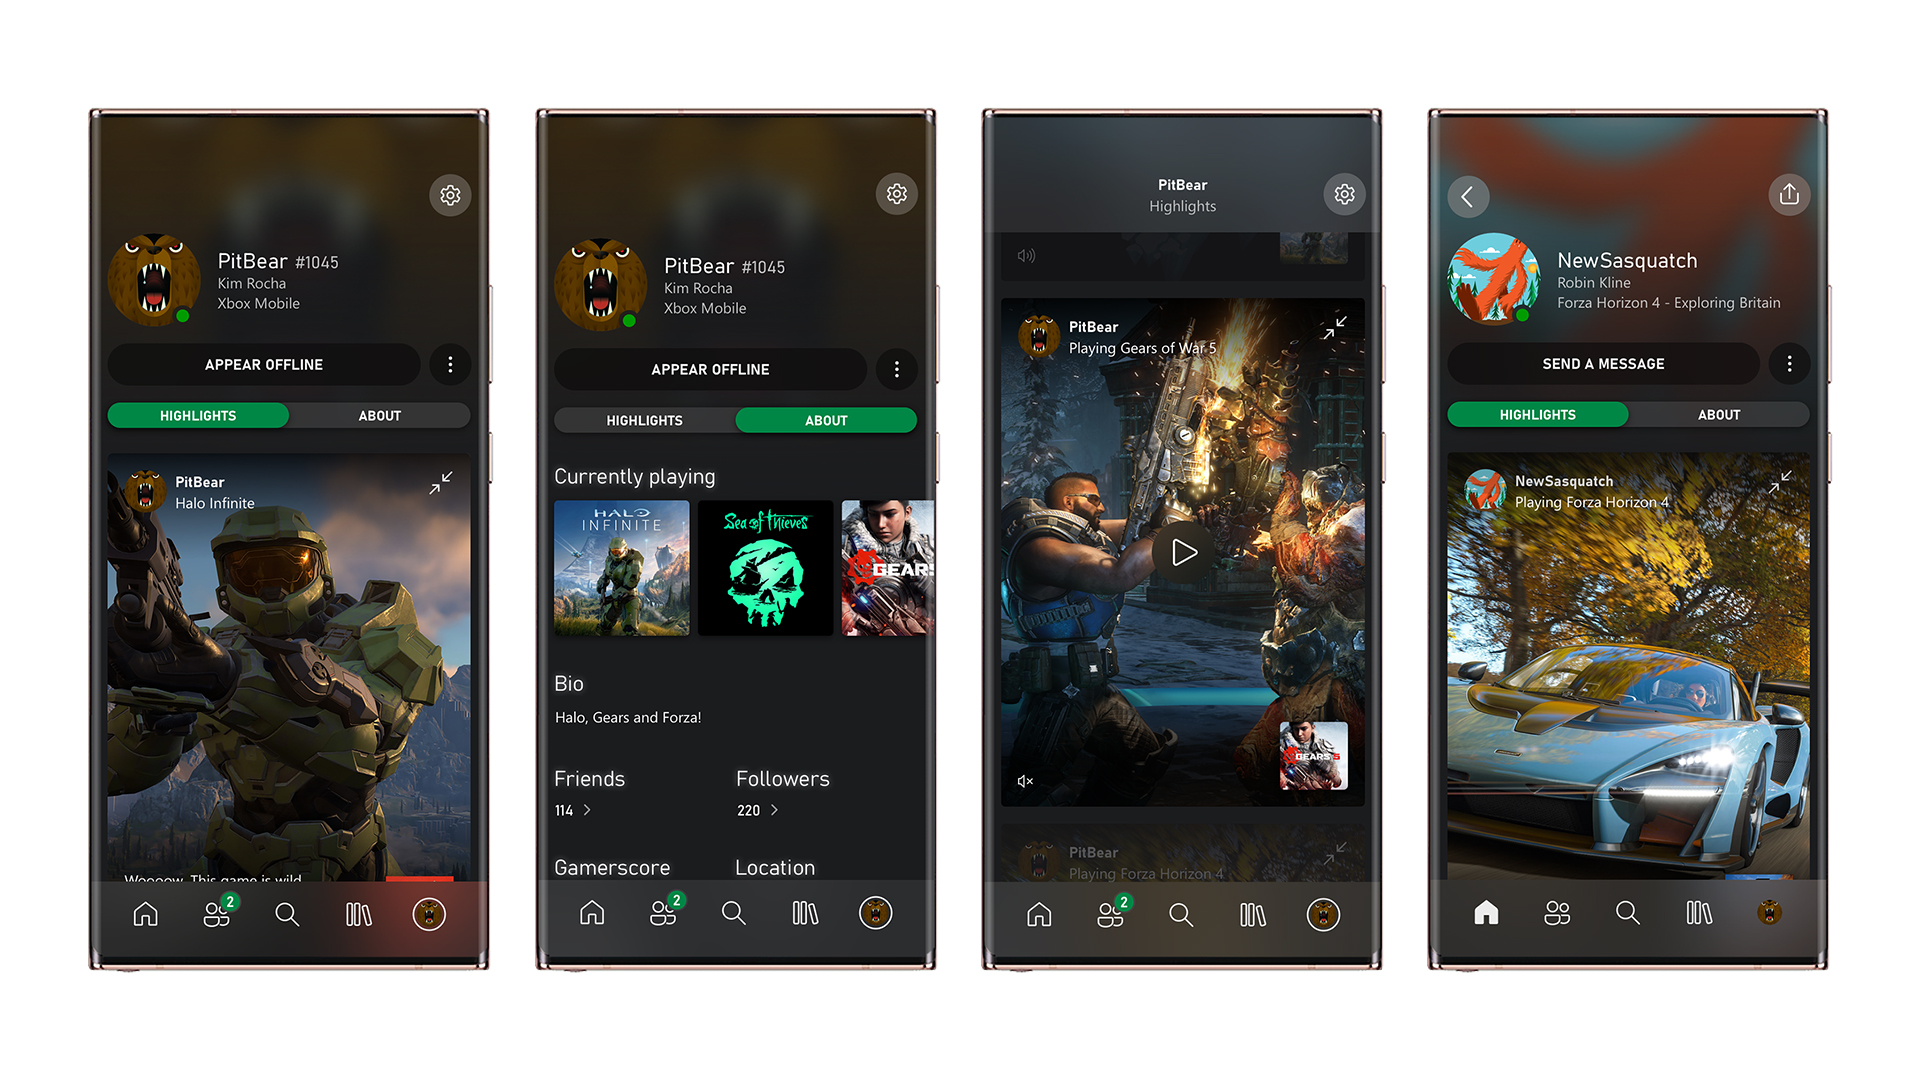 New Gamertag Features Come to Xbox One and Mobile Devices - Xbox Wire